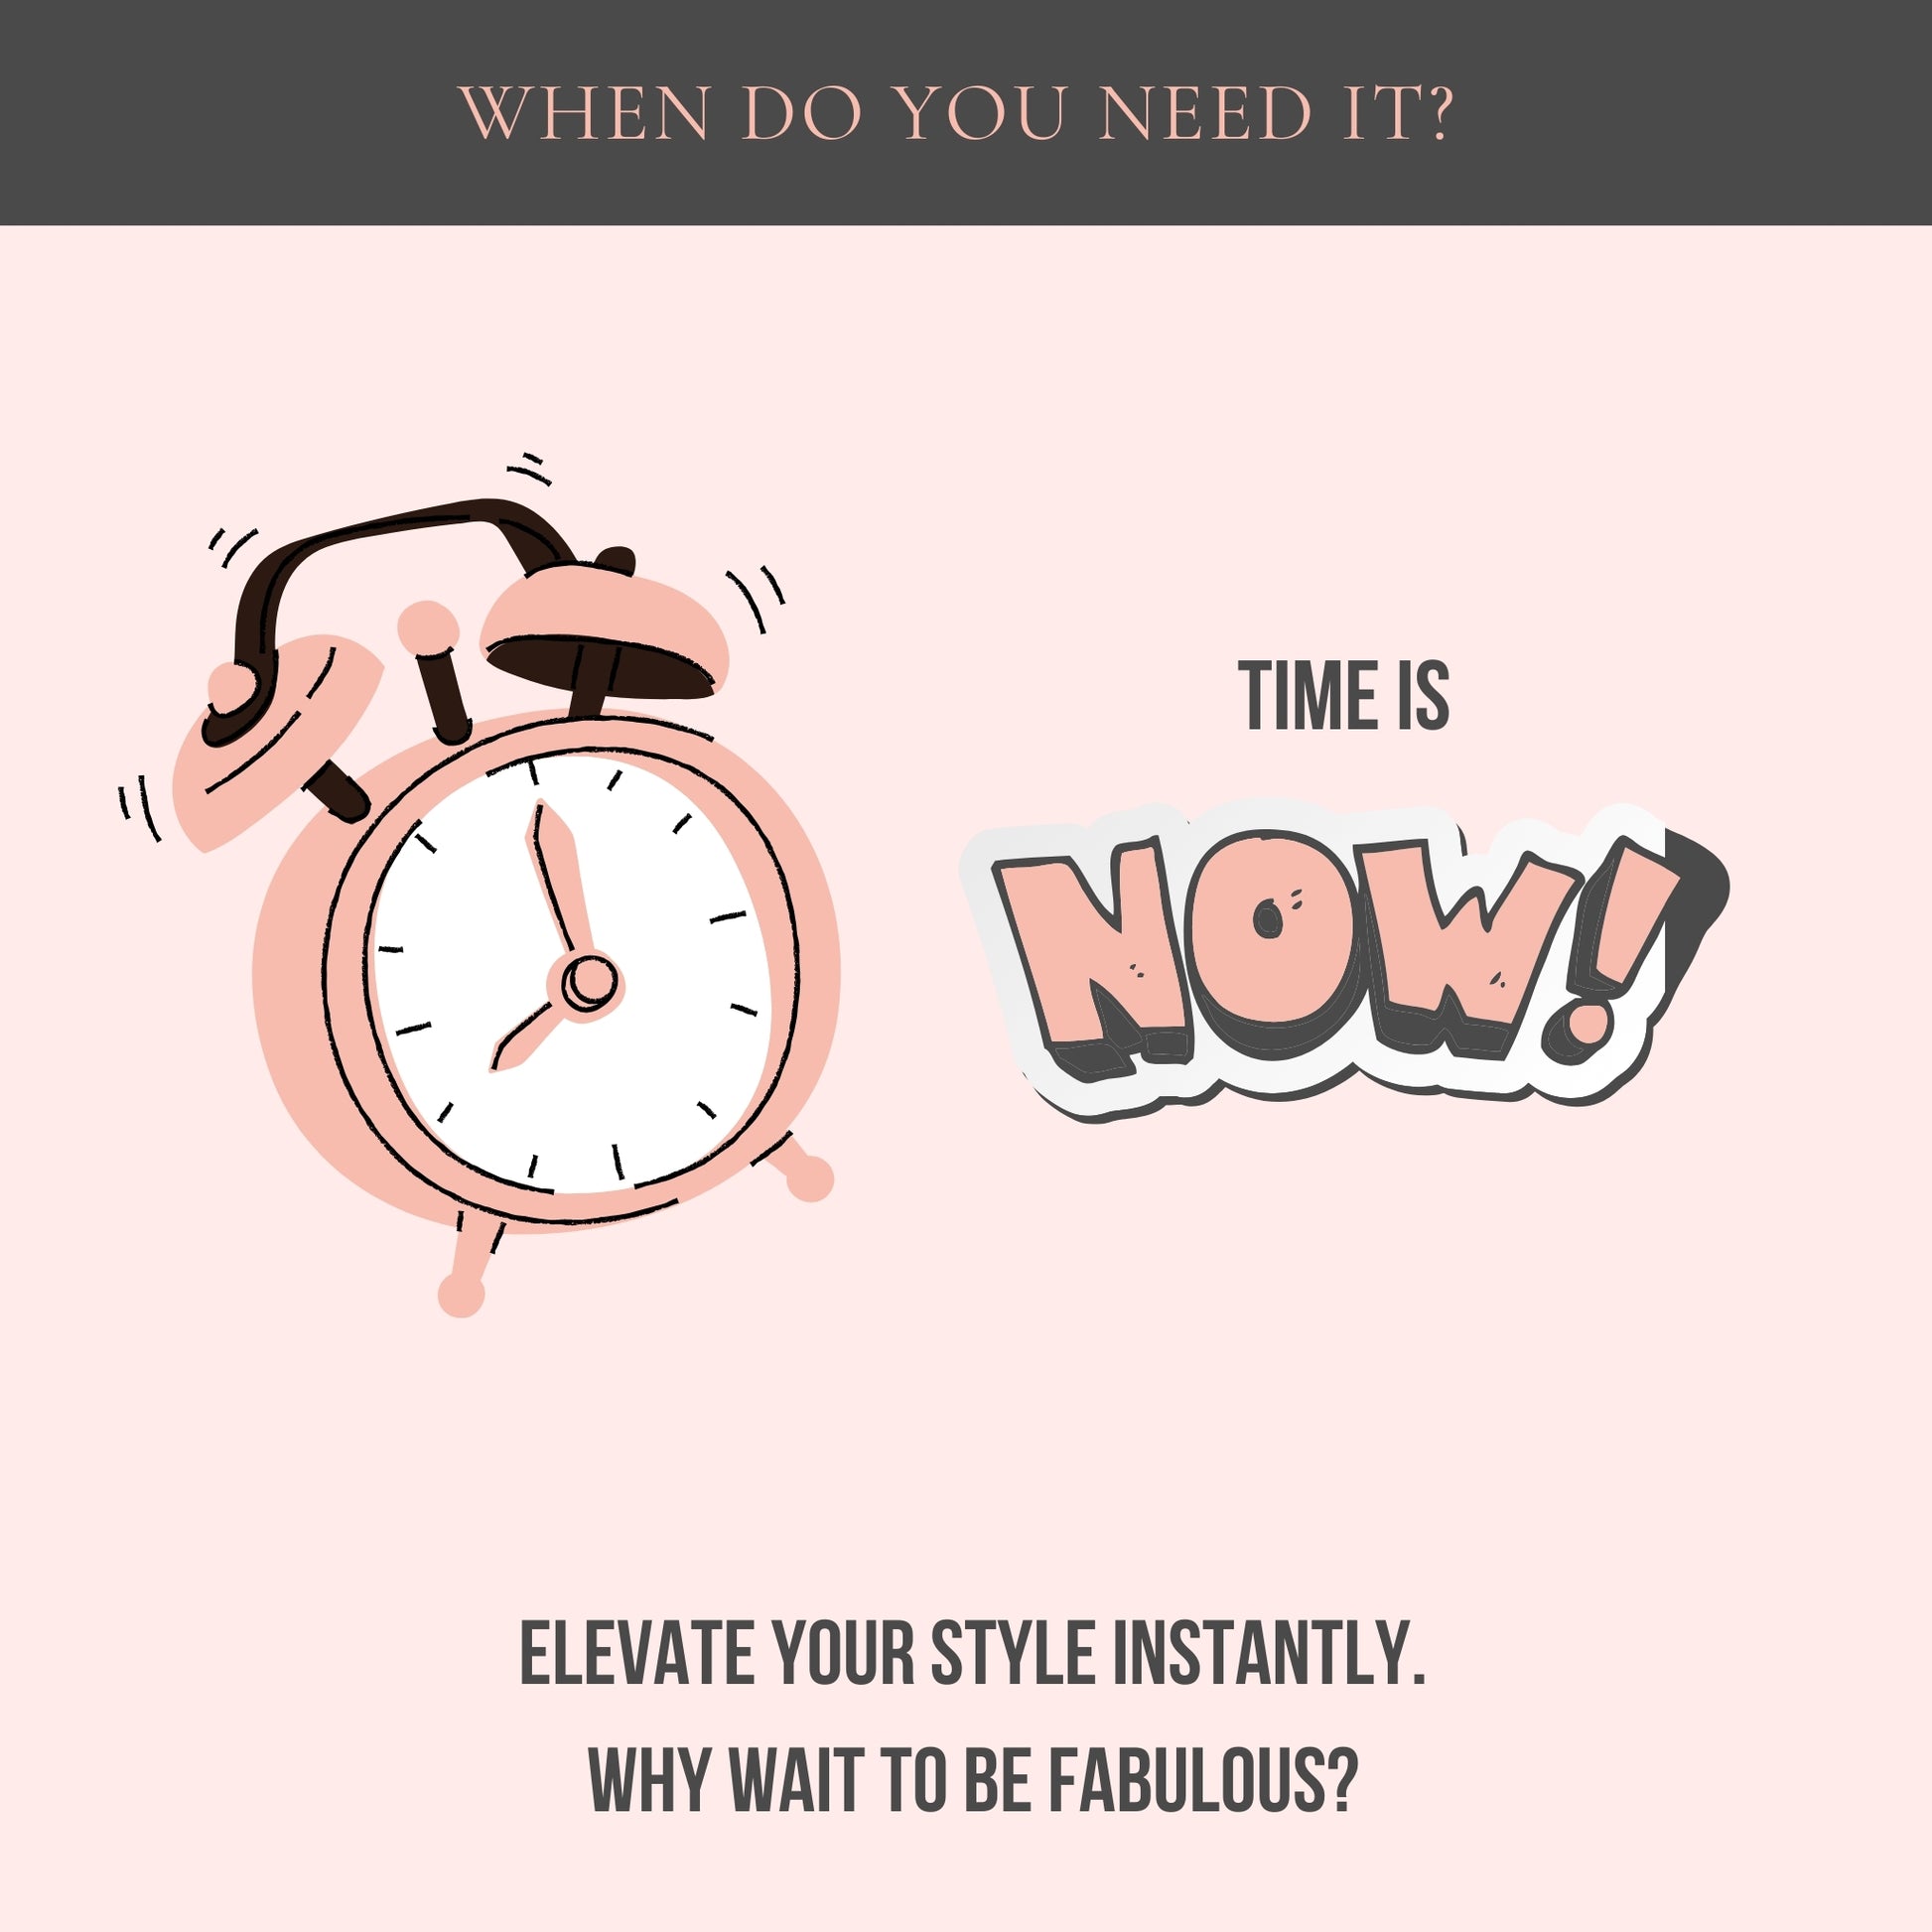 Top Center: When do you need it? Middle center: An alarm clock and the text "Time is Now!". Bottom center: Elevate your style instantly. Why wait to be fabulous?